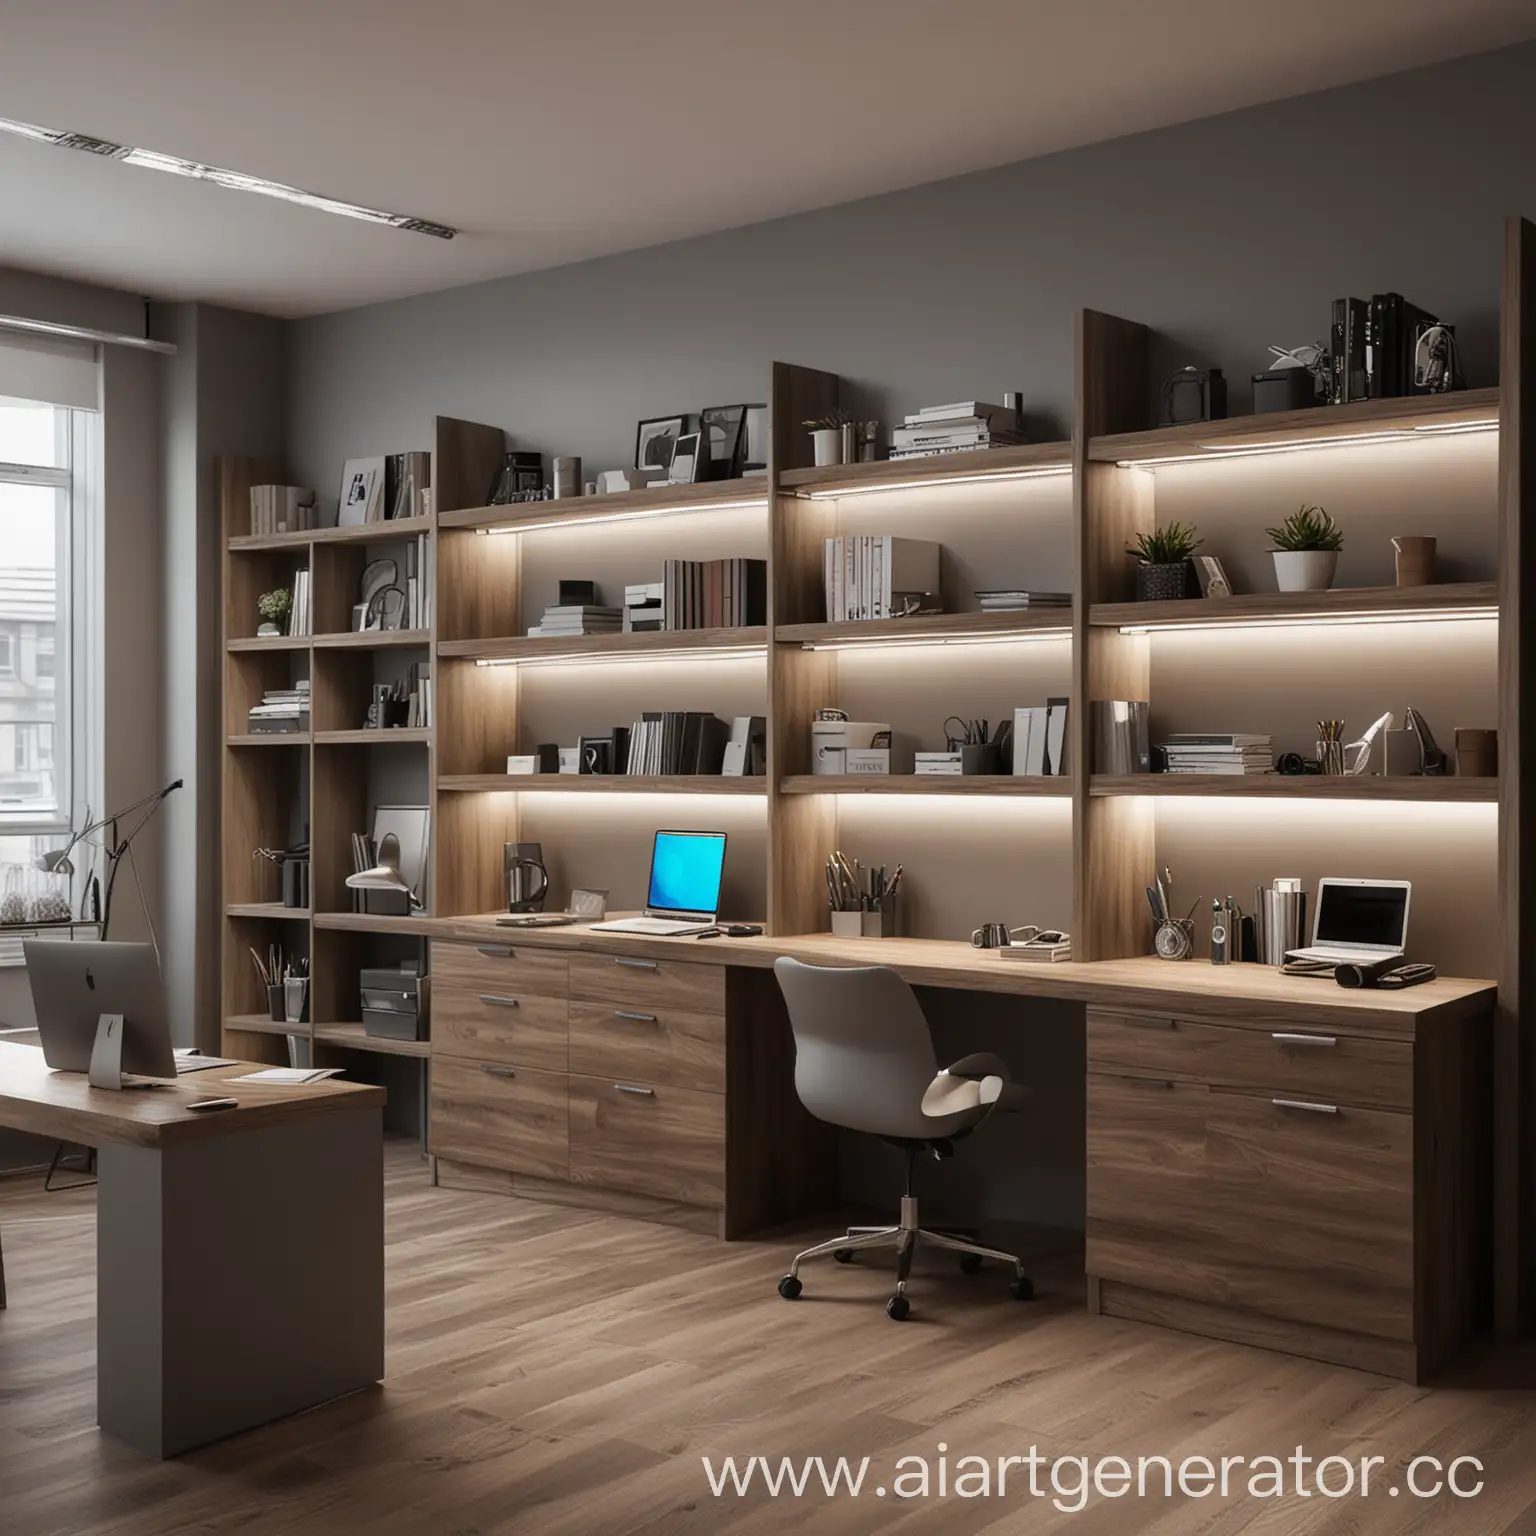 working area with shelves and cabinets office space for the company background with RGB blacklight in gray brown tones without bright colors